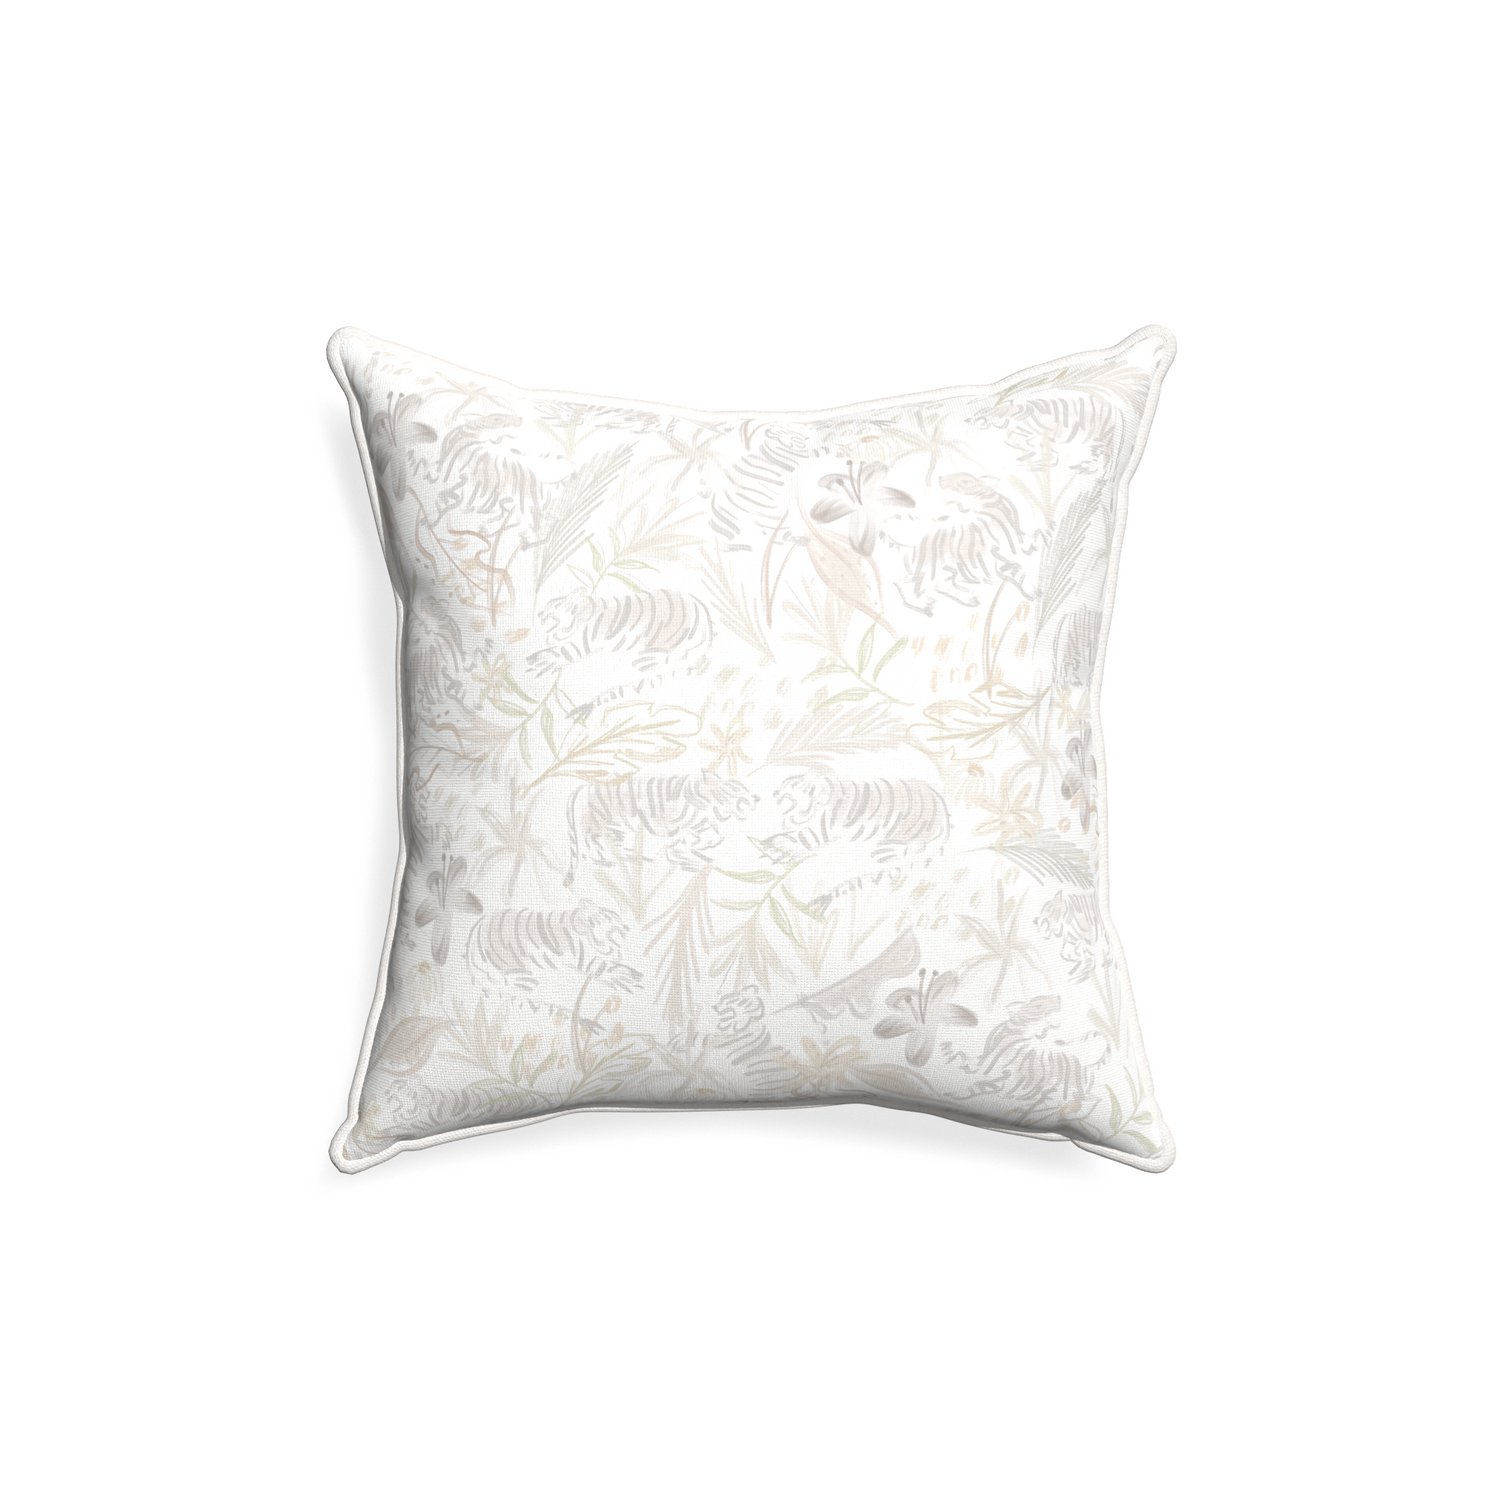 18-square frida sand custom beige chinoiserie tigerpillow with snow piping on white background